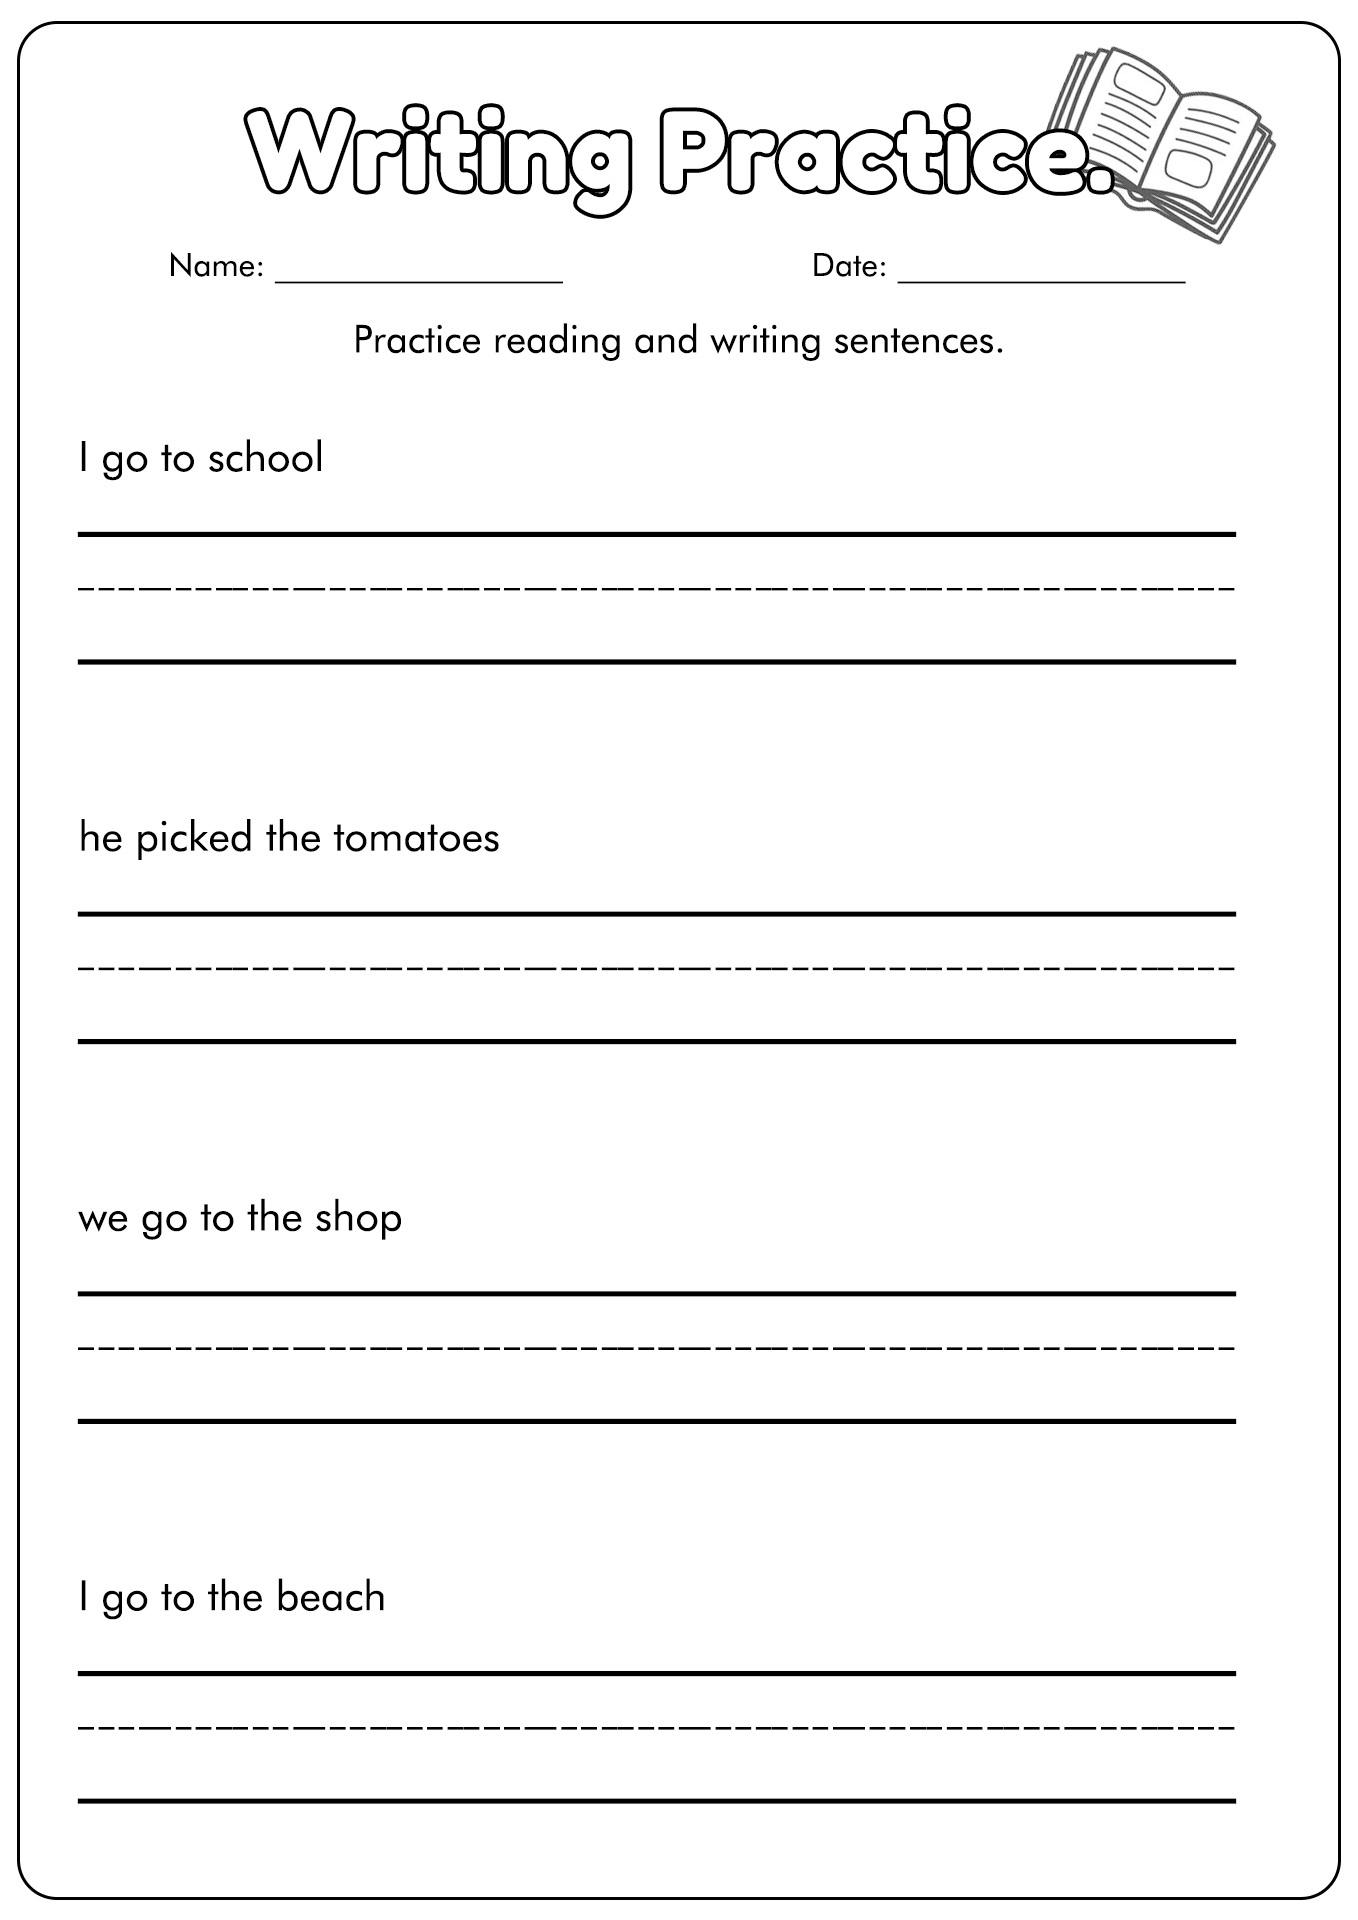 17 Best Images of Simple Sentence Worksheets 6th Grade - 7th Grade